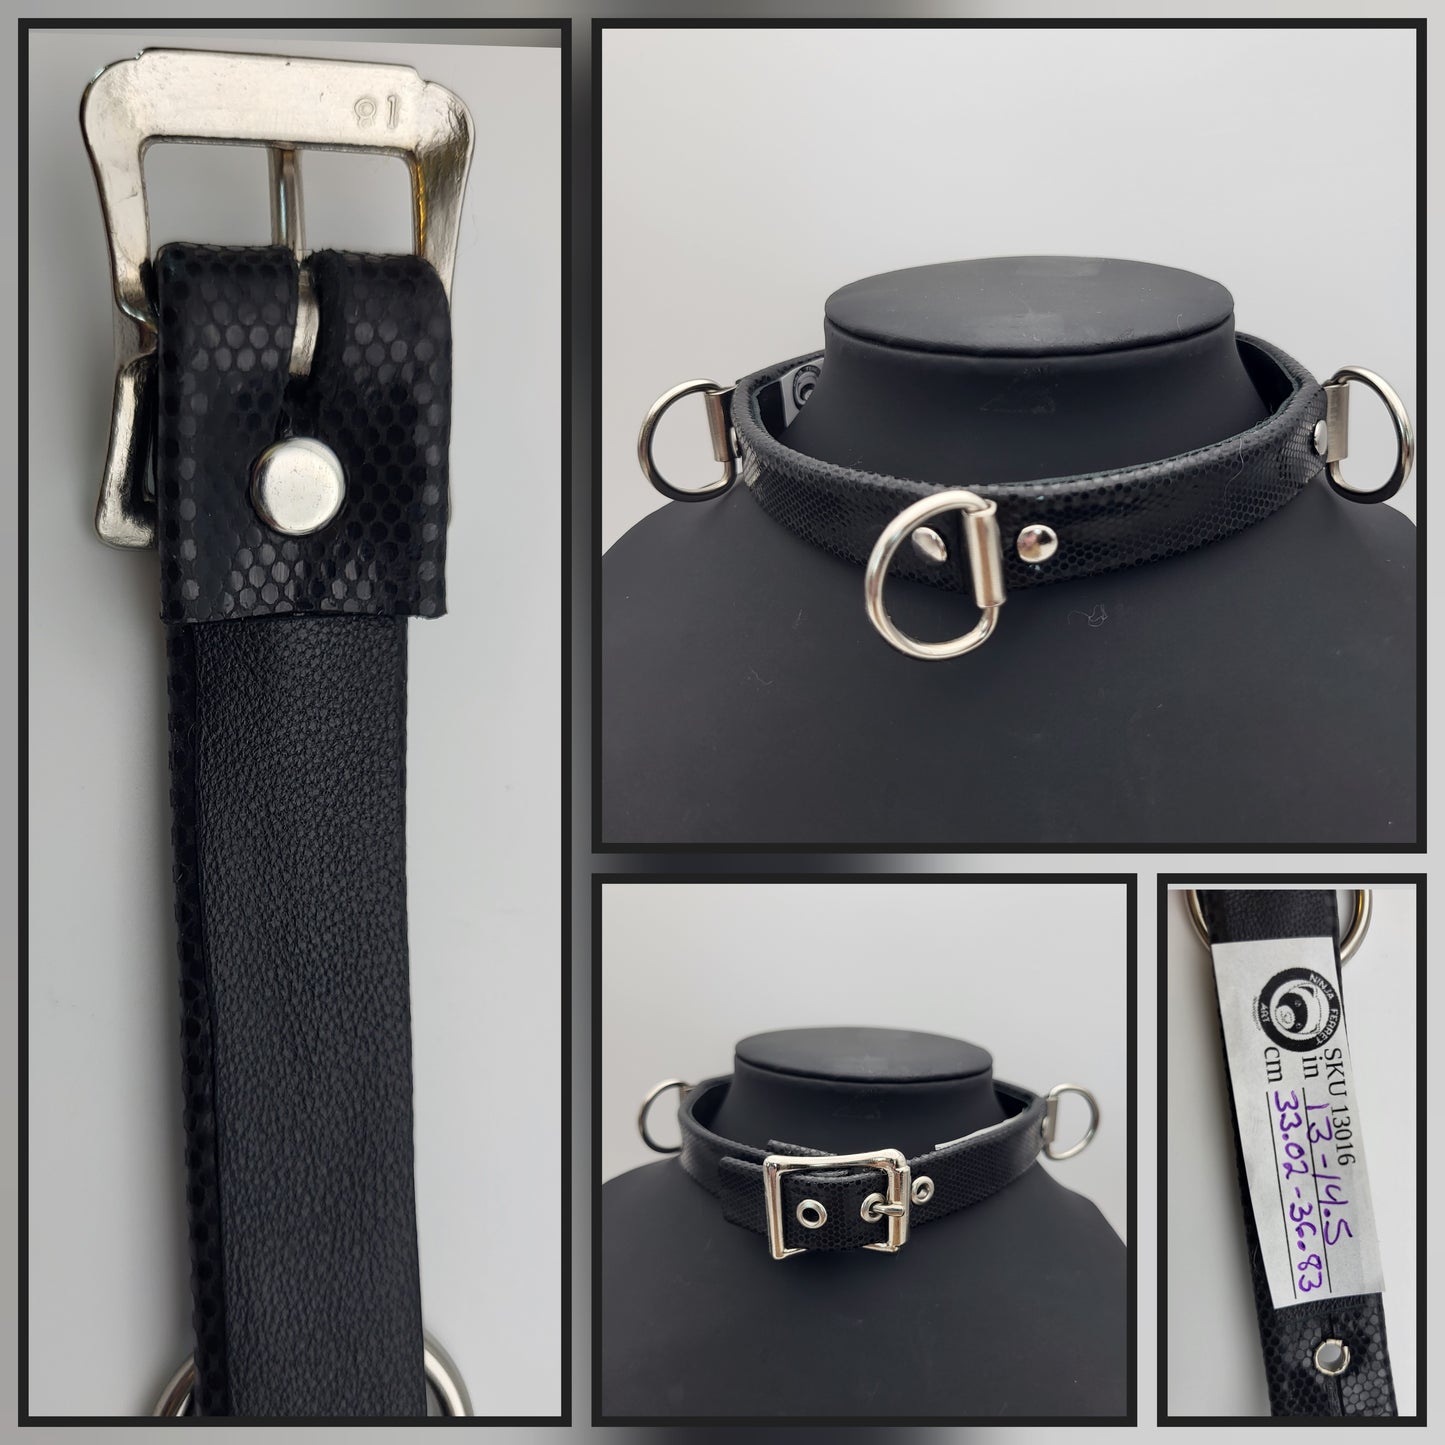 Black faux stingray (real leather) collar black lambskin lining and buckle. 13"-14.5"/33.02-36.83cm